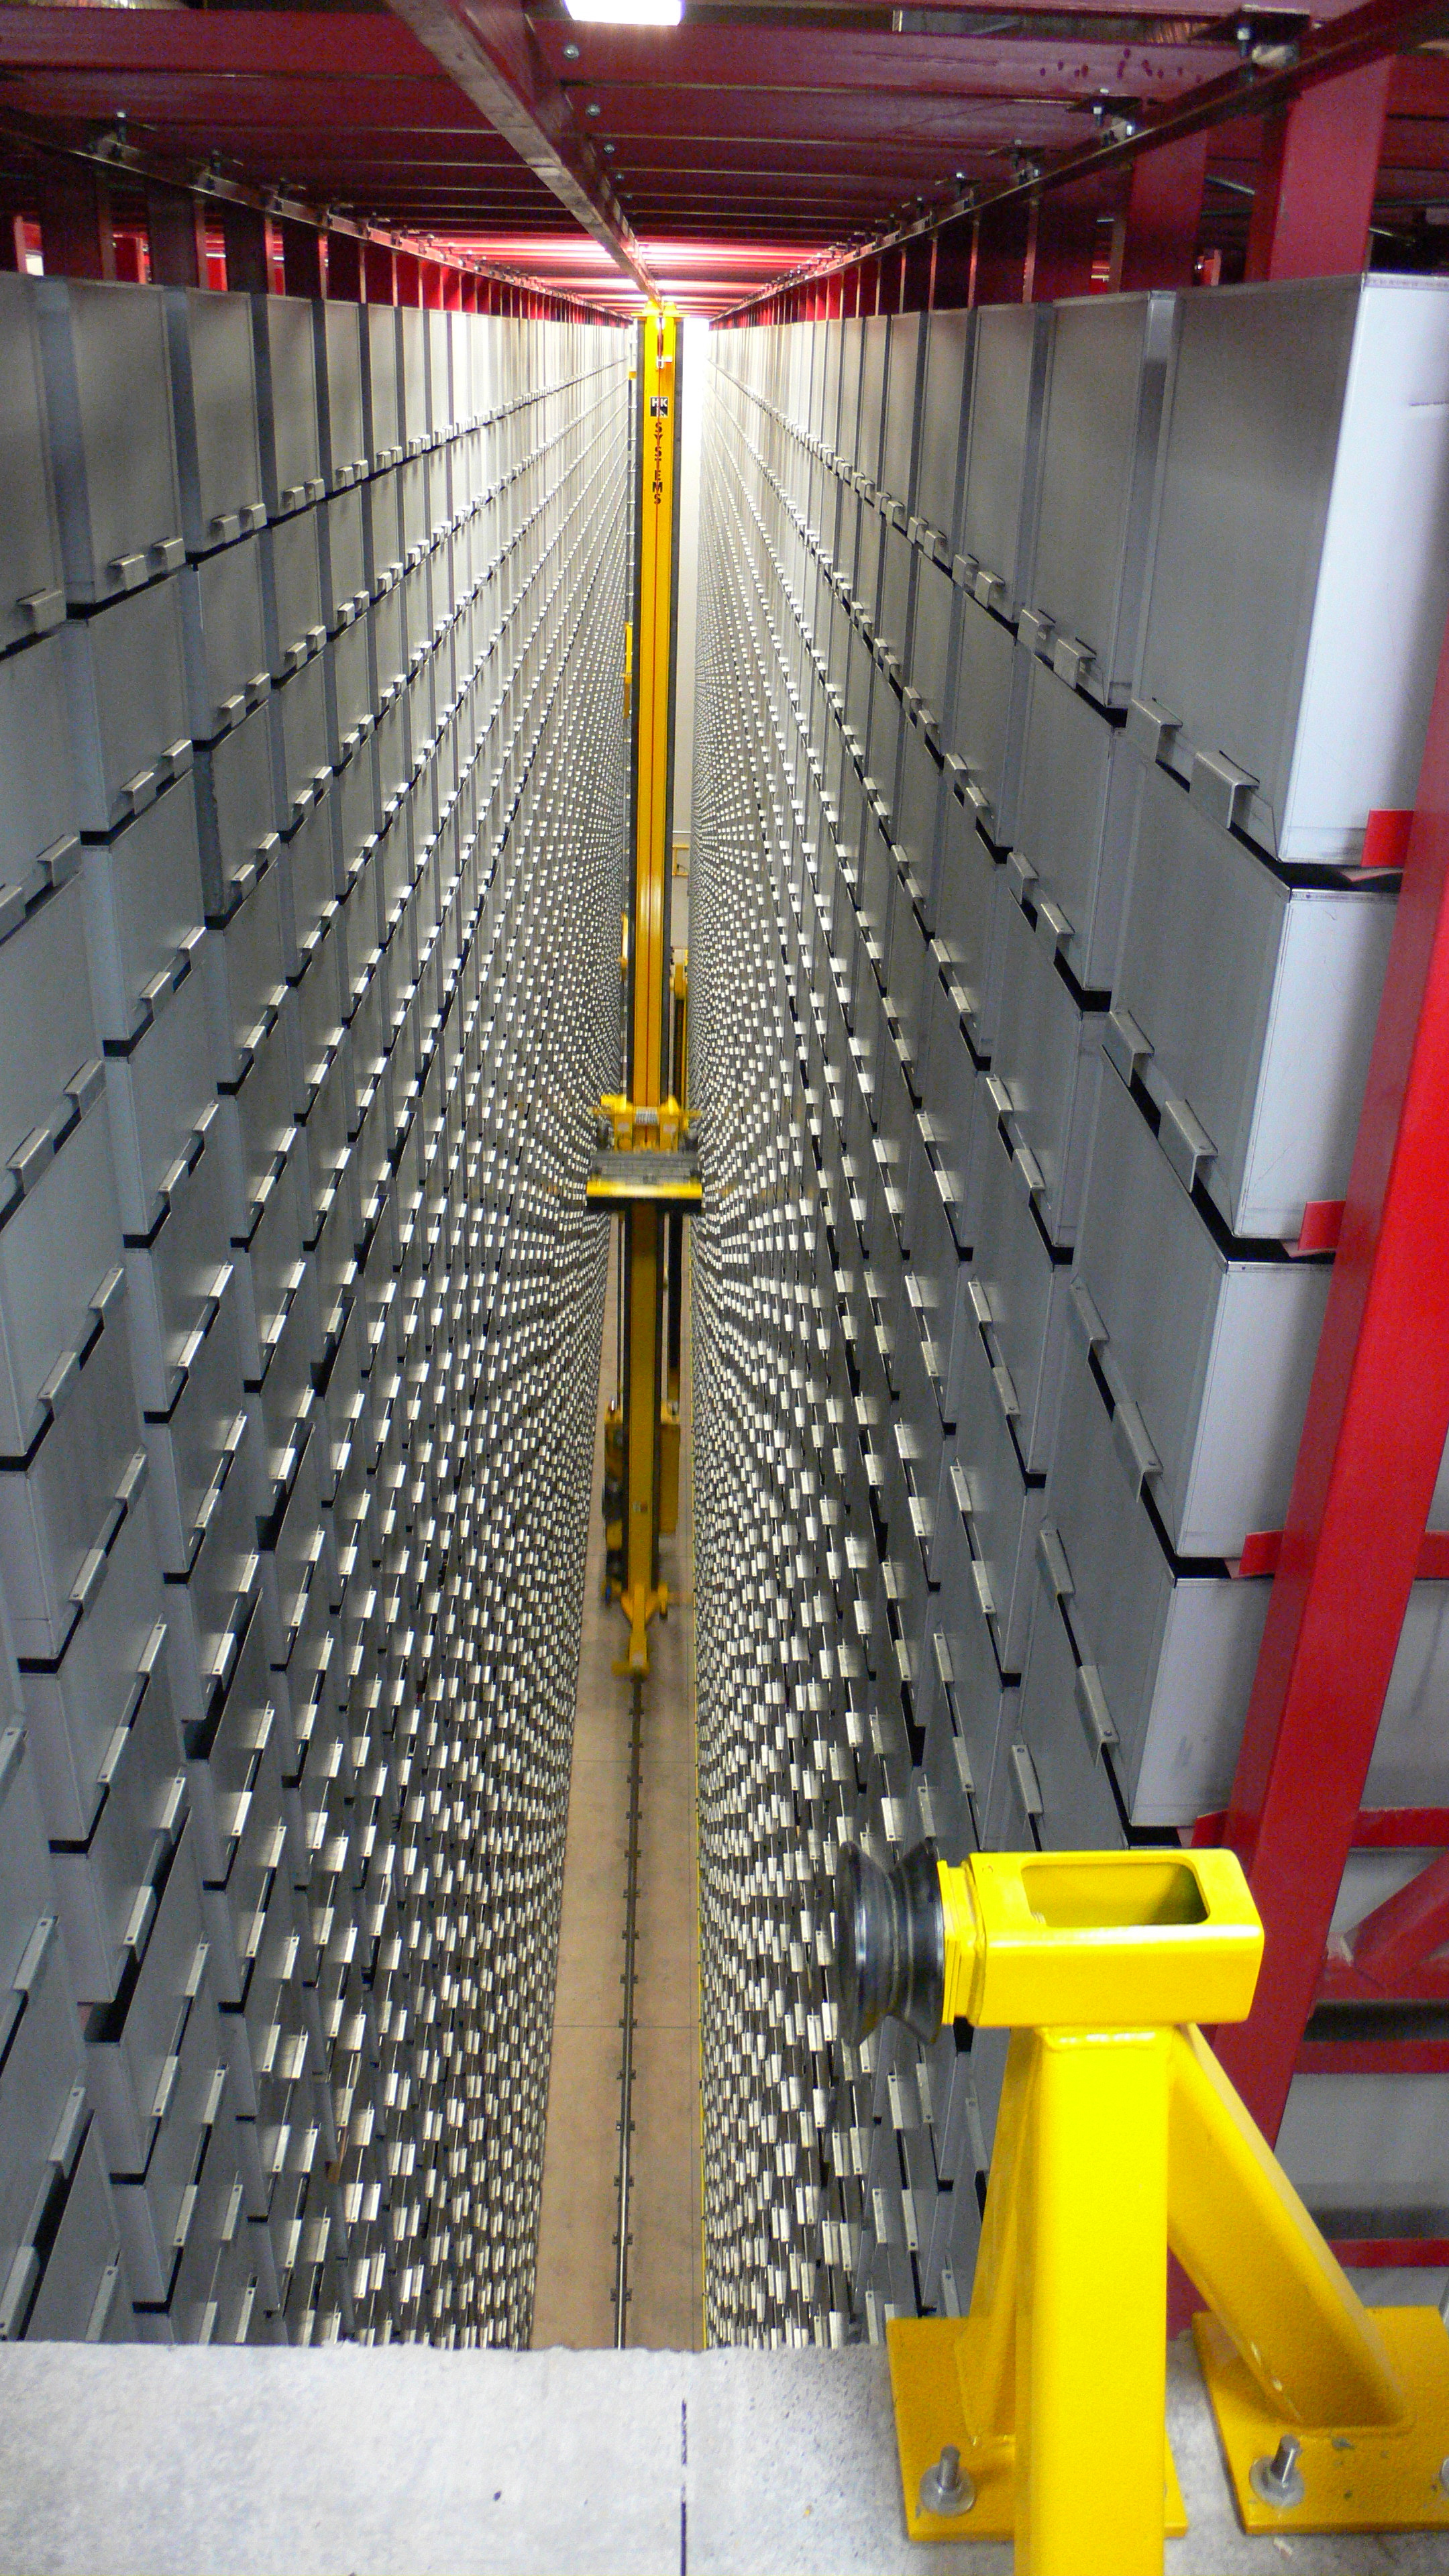 An automated storage and retrieval system fetching books in a library.